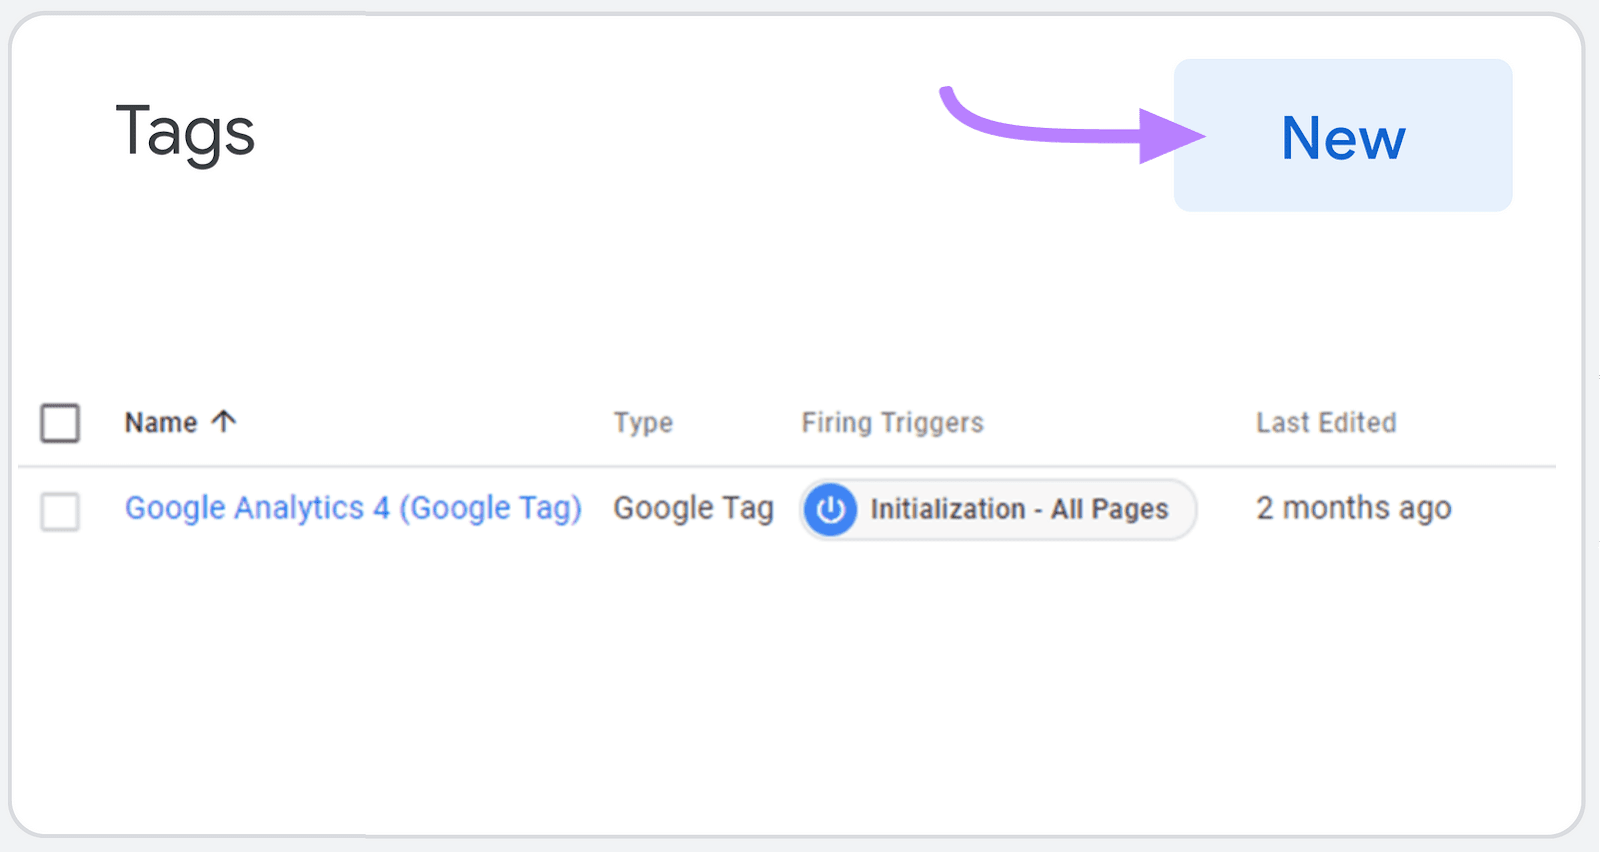 "New" button highlighted under "Tags" section in GTM